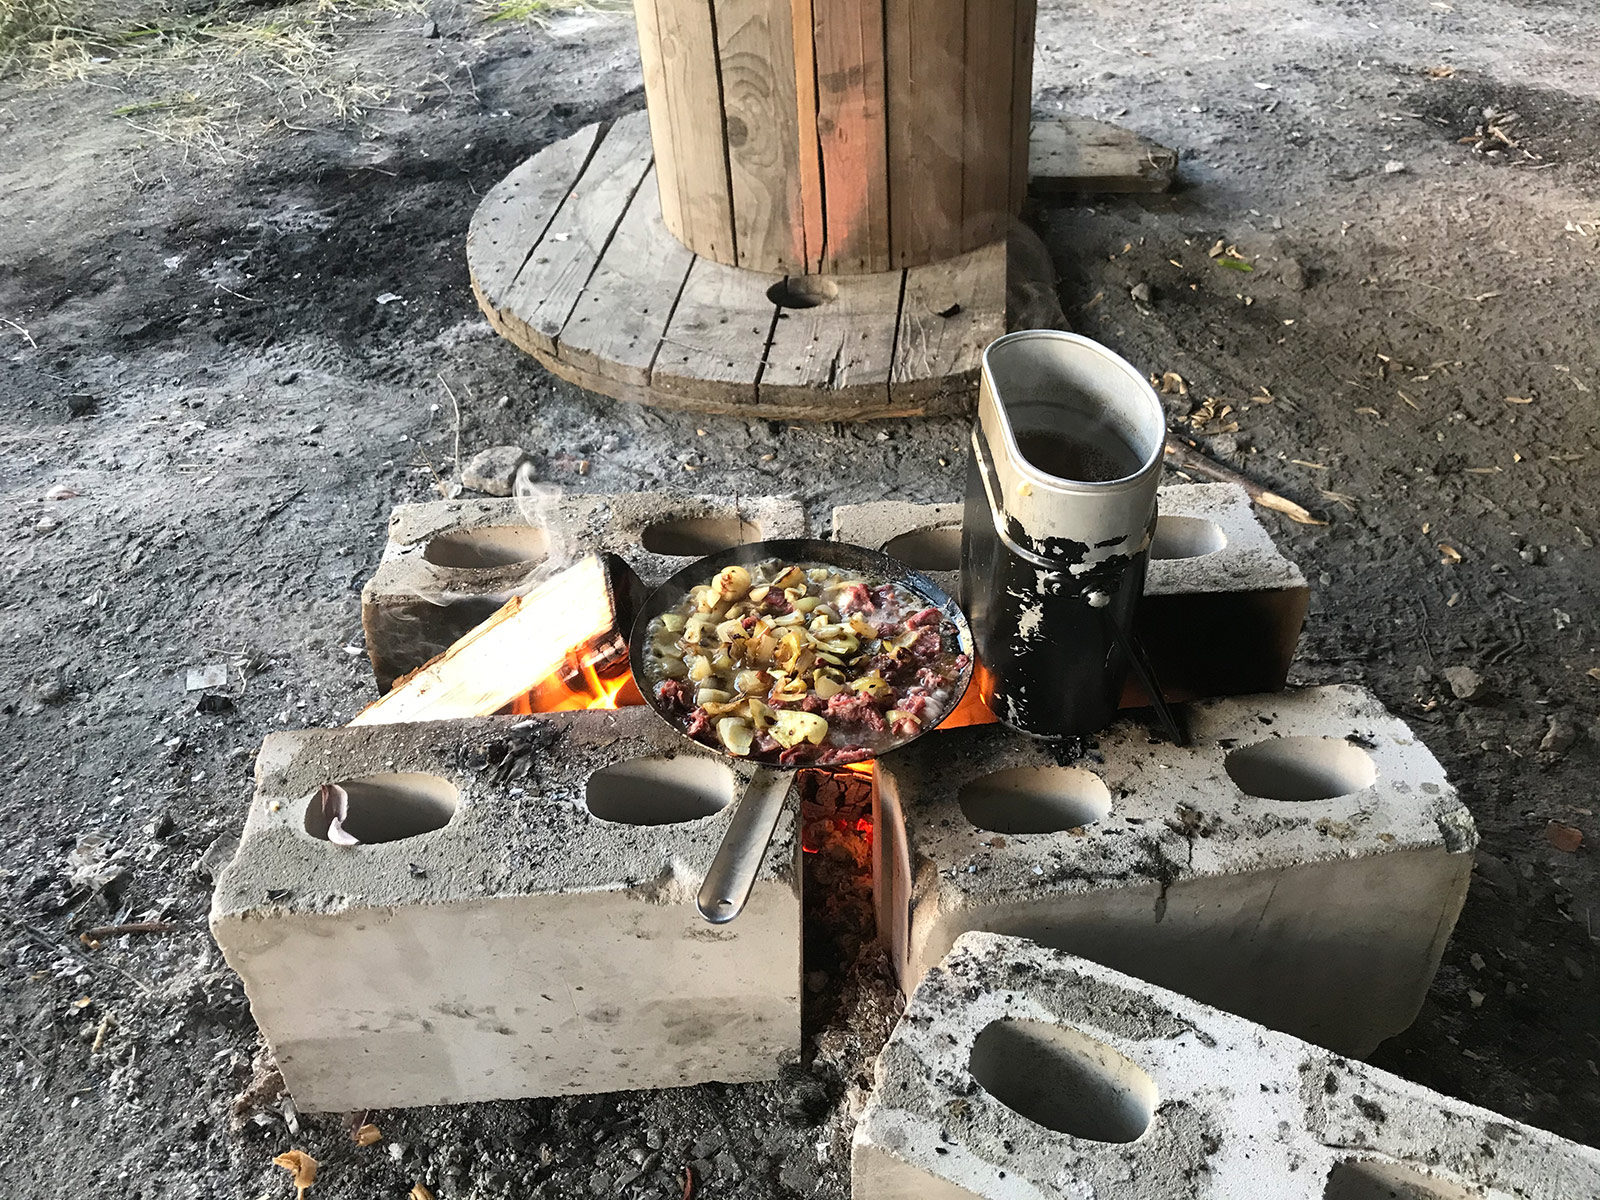 The Swiss mess tin stored my survival kit and worked as a cooking vessel